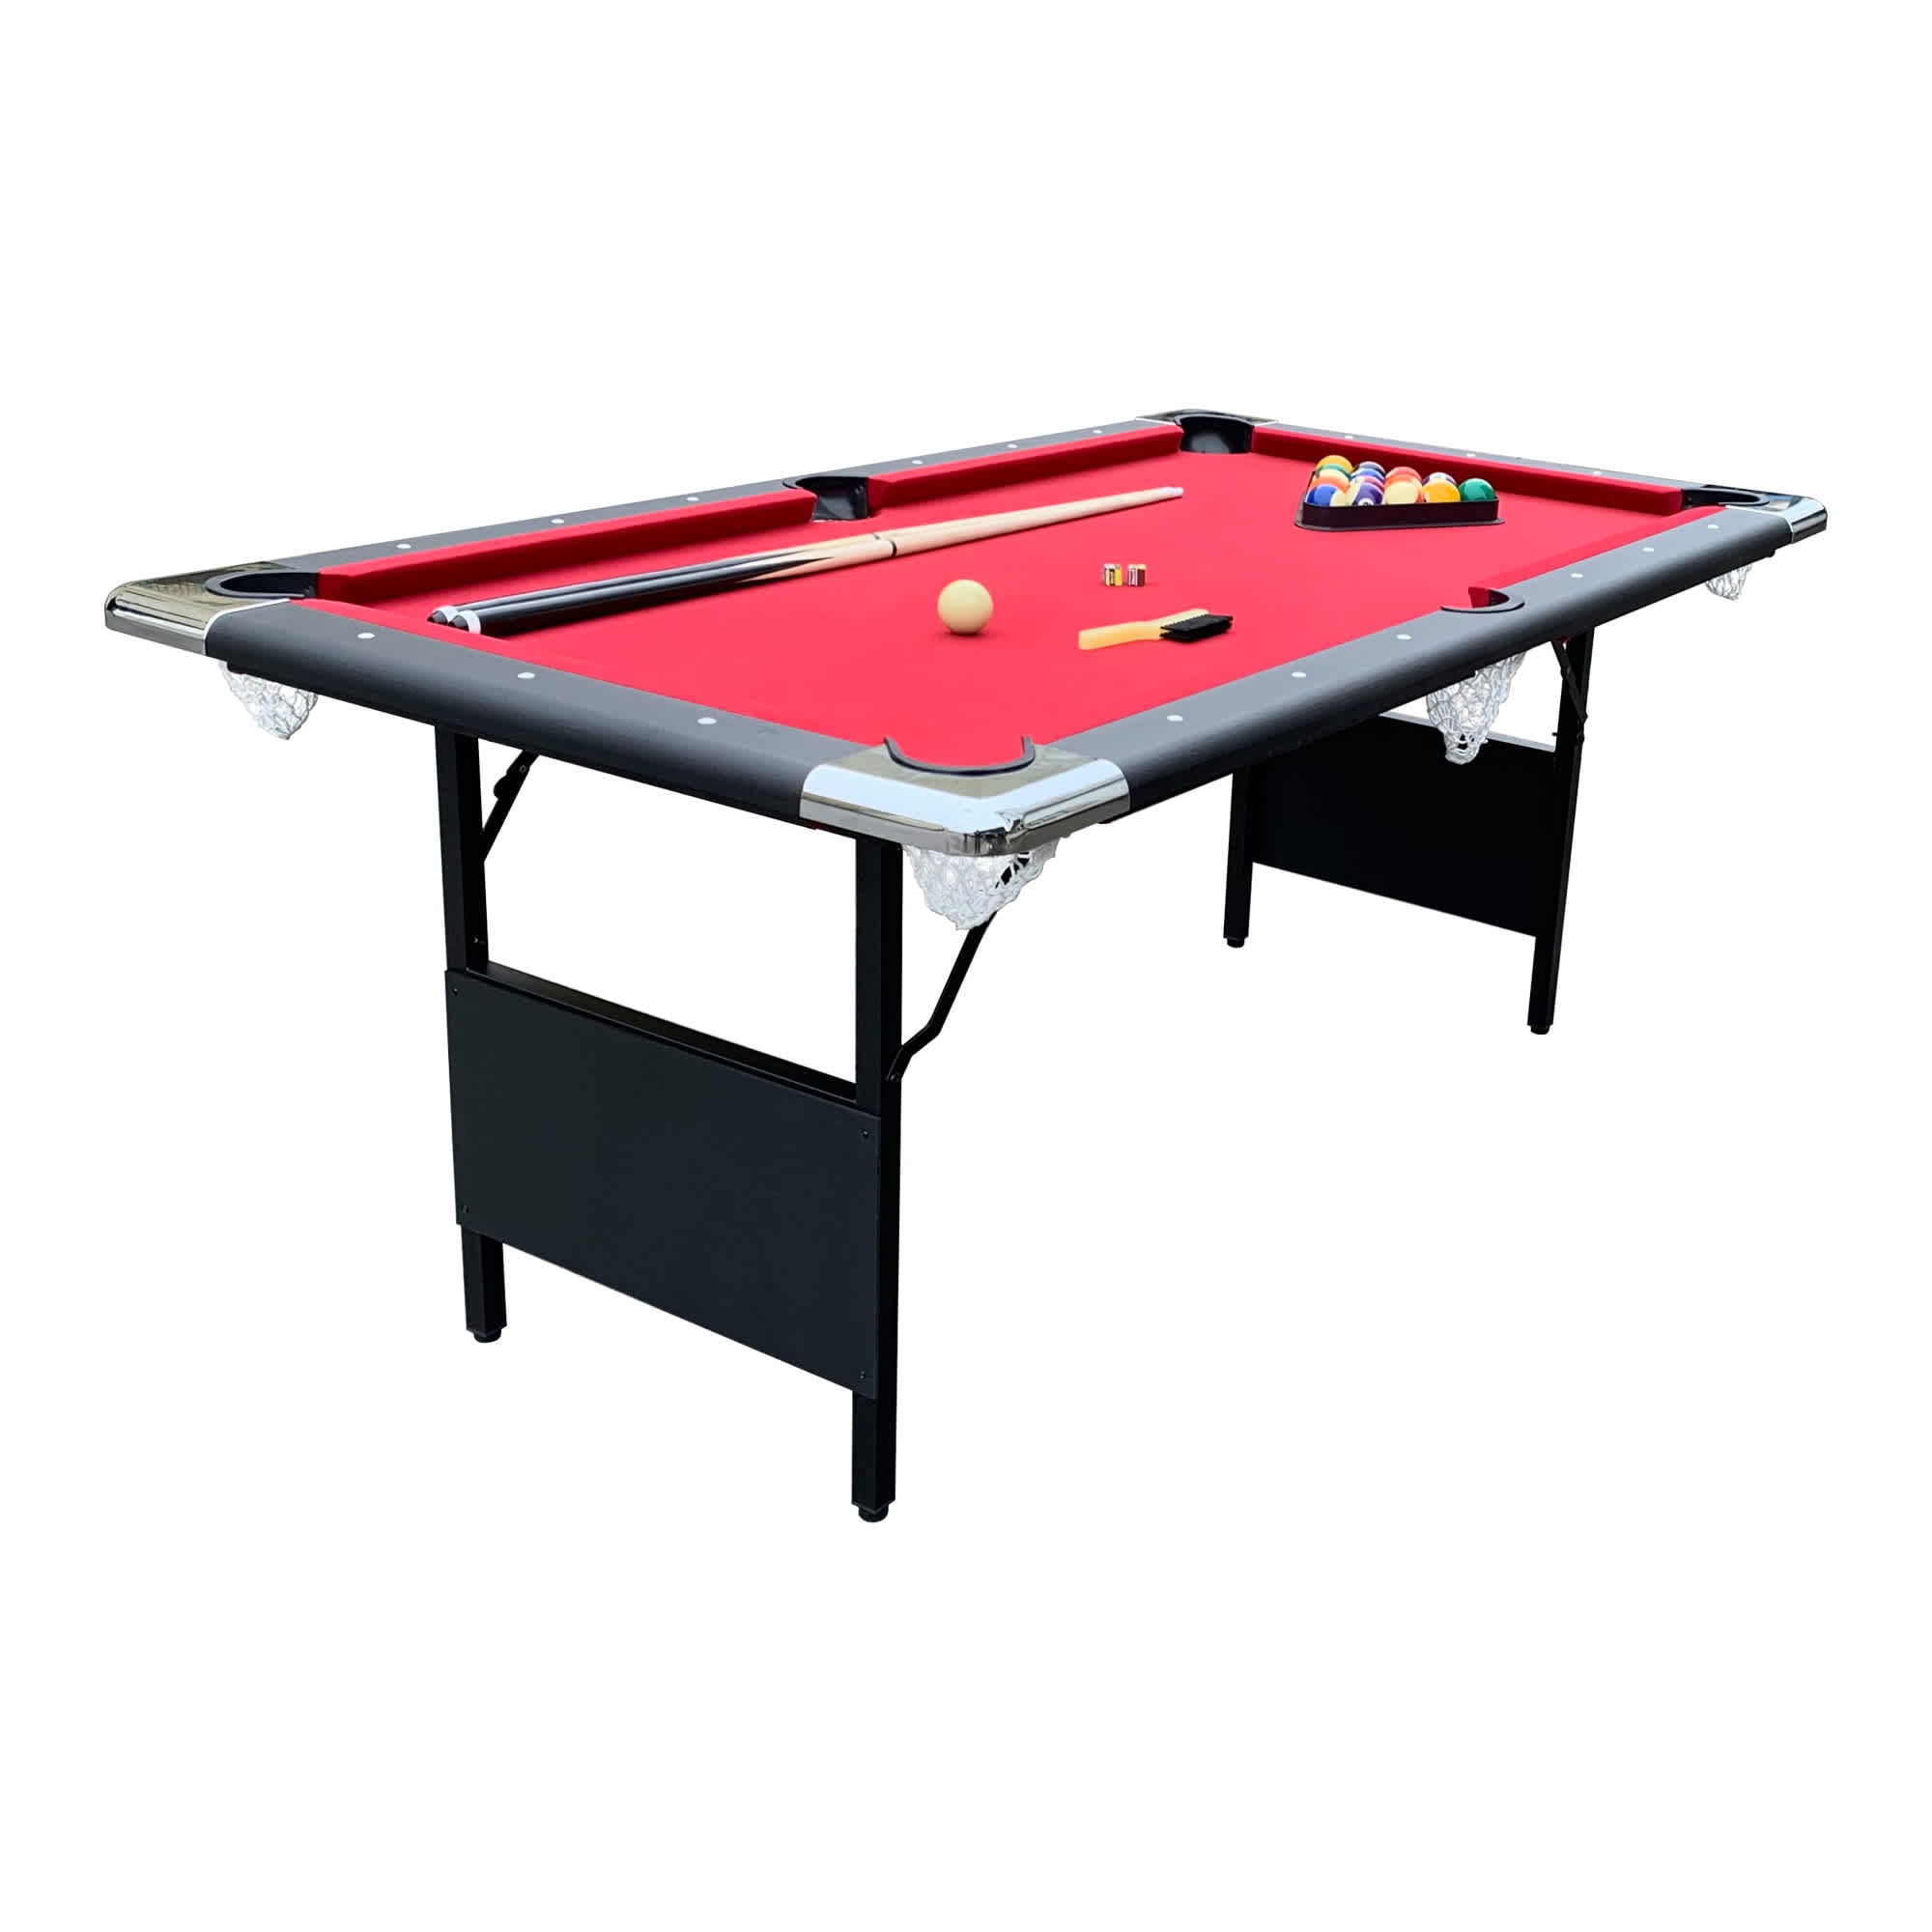 Soozier 55'' Portable Folding Billiards Table Game Pool Table For Kids  Adults With Cues, Ball, Rack, Brush, Chalk : Target